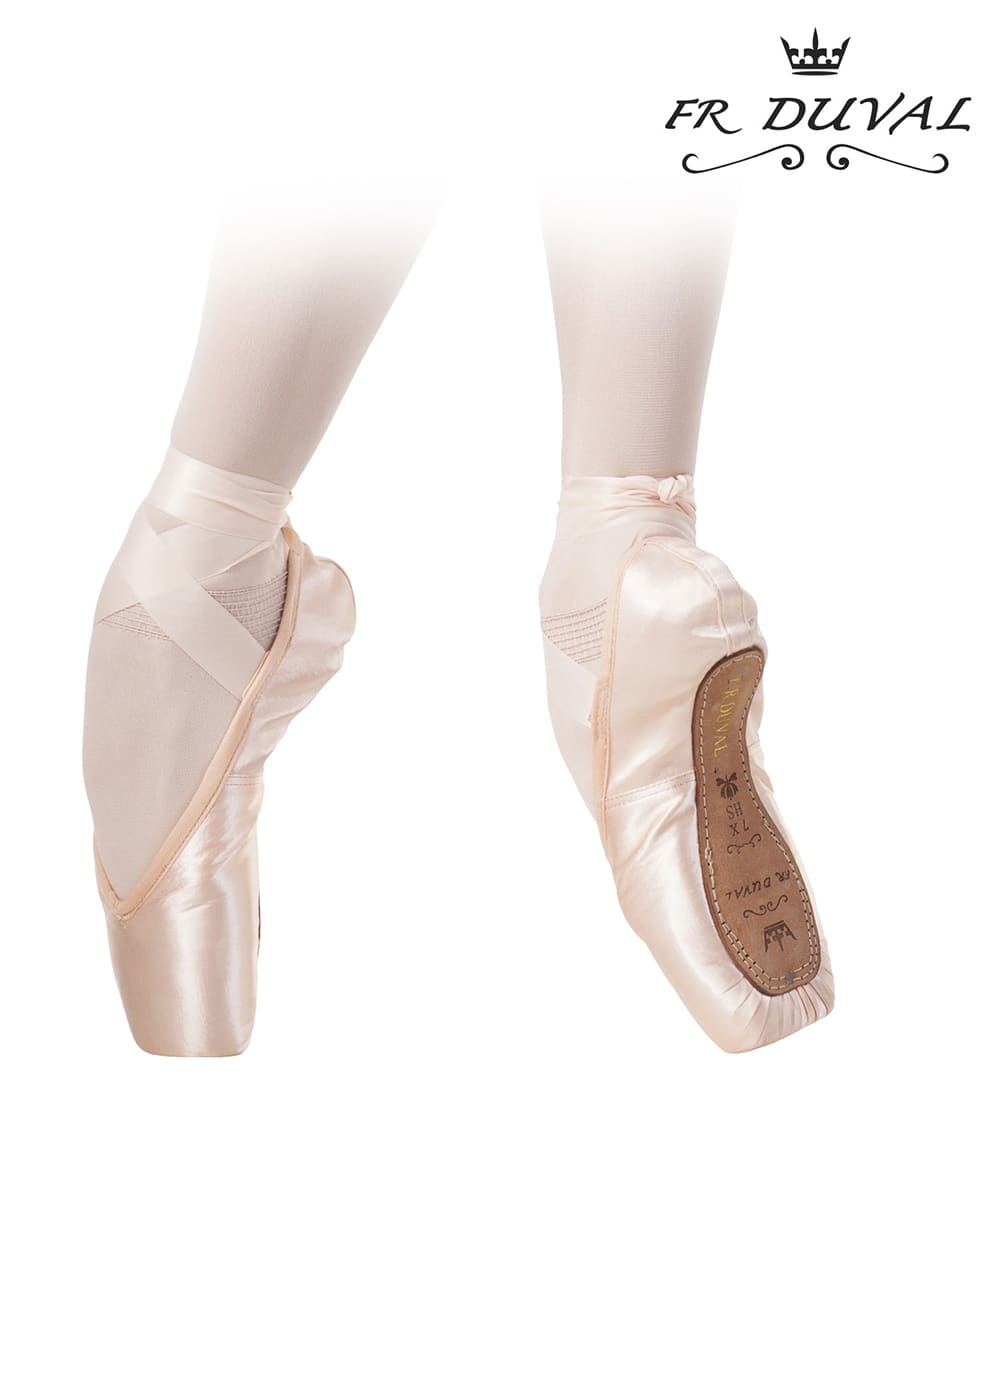 Pointe shoes SANSHA Duval RUS, extra strong